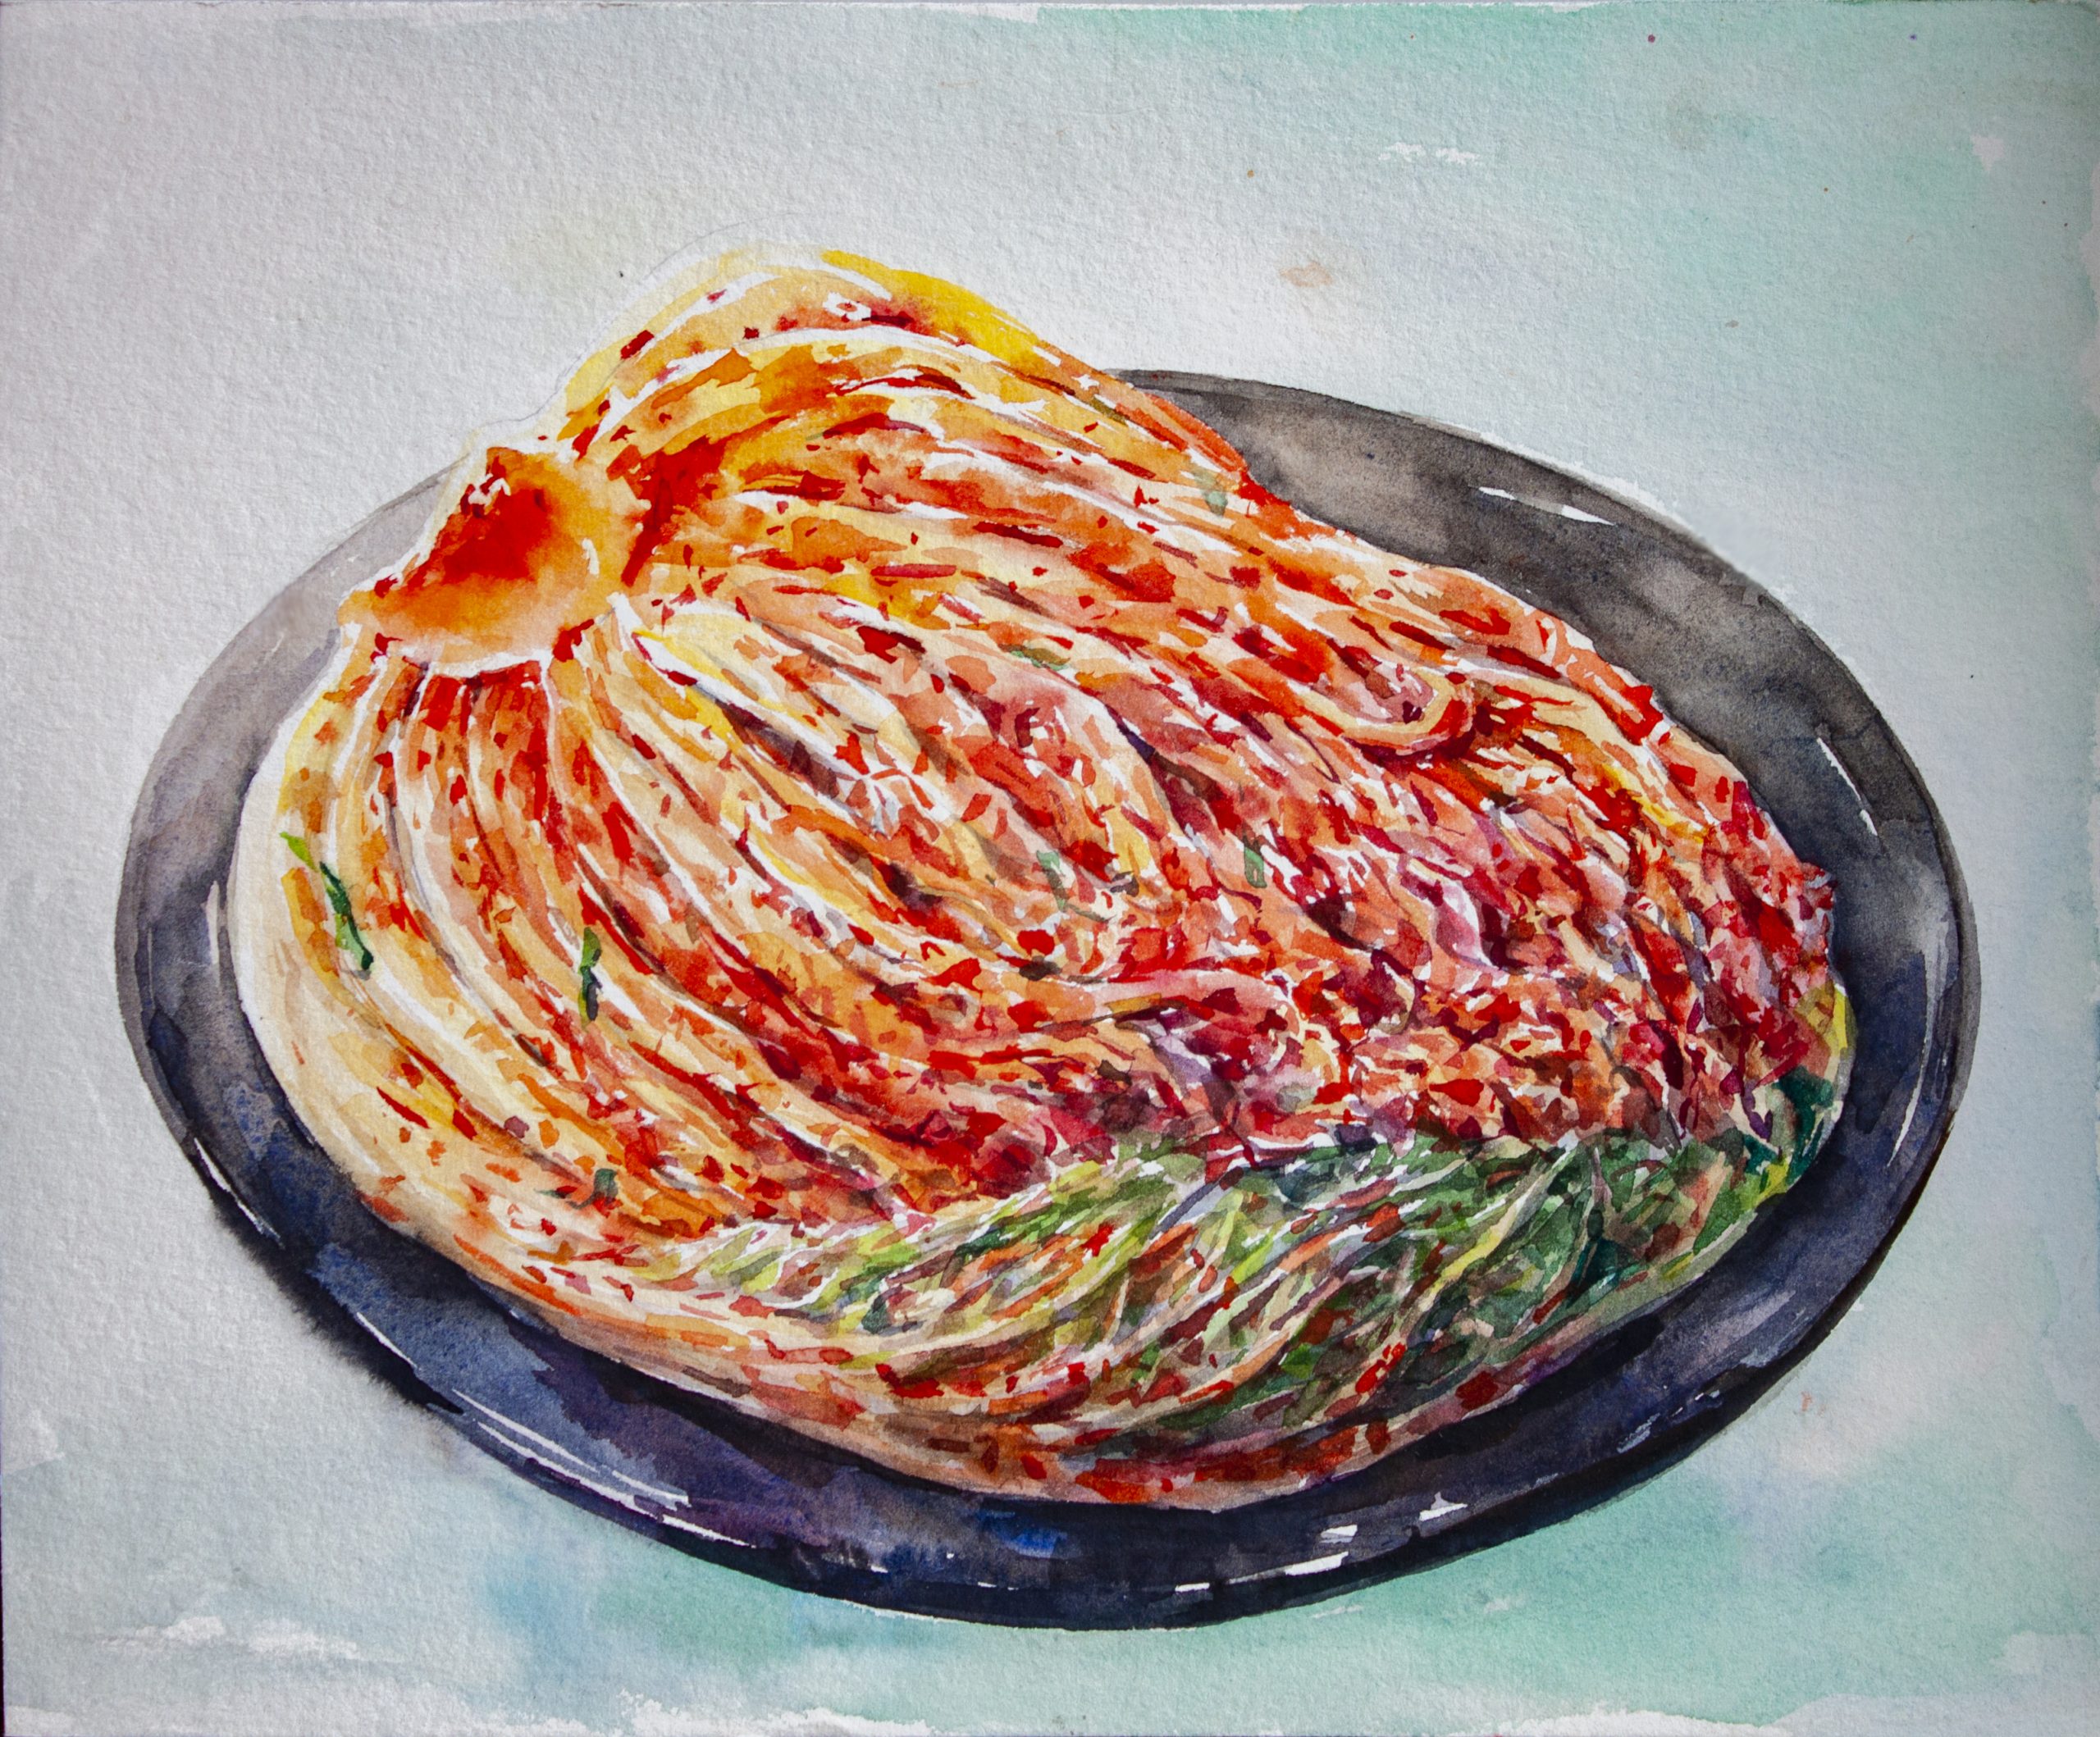 A glistening half of a kimchi napa cabbage head is displayed in a round black ceramic dish. The background is a wash of turquoise watercolor paint.